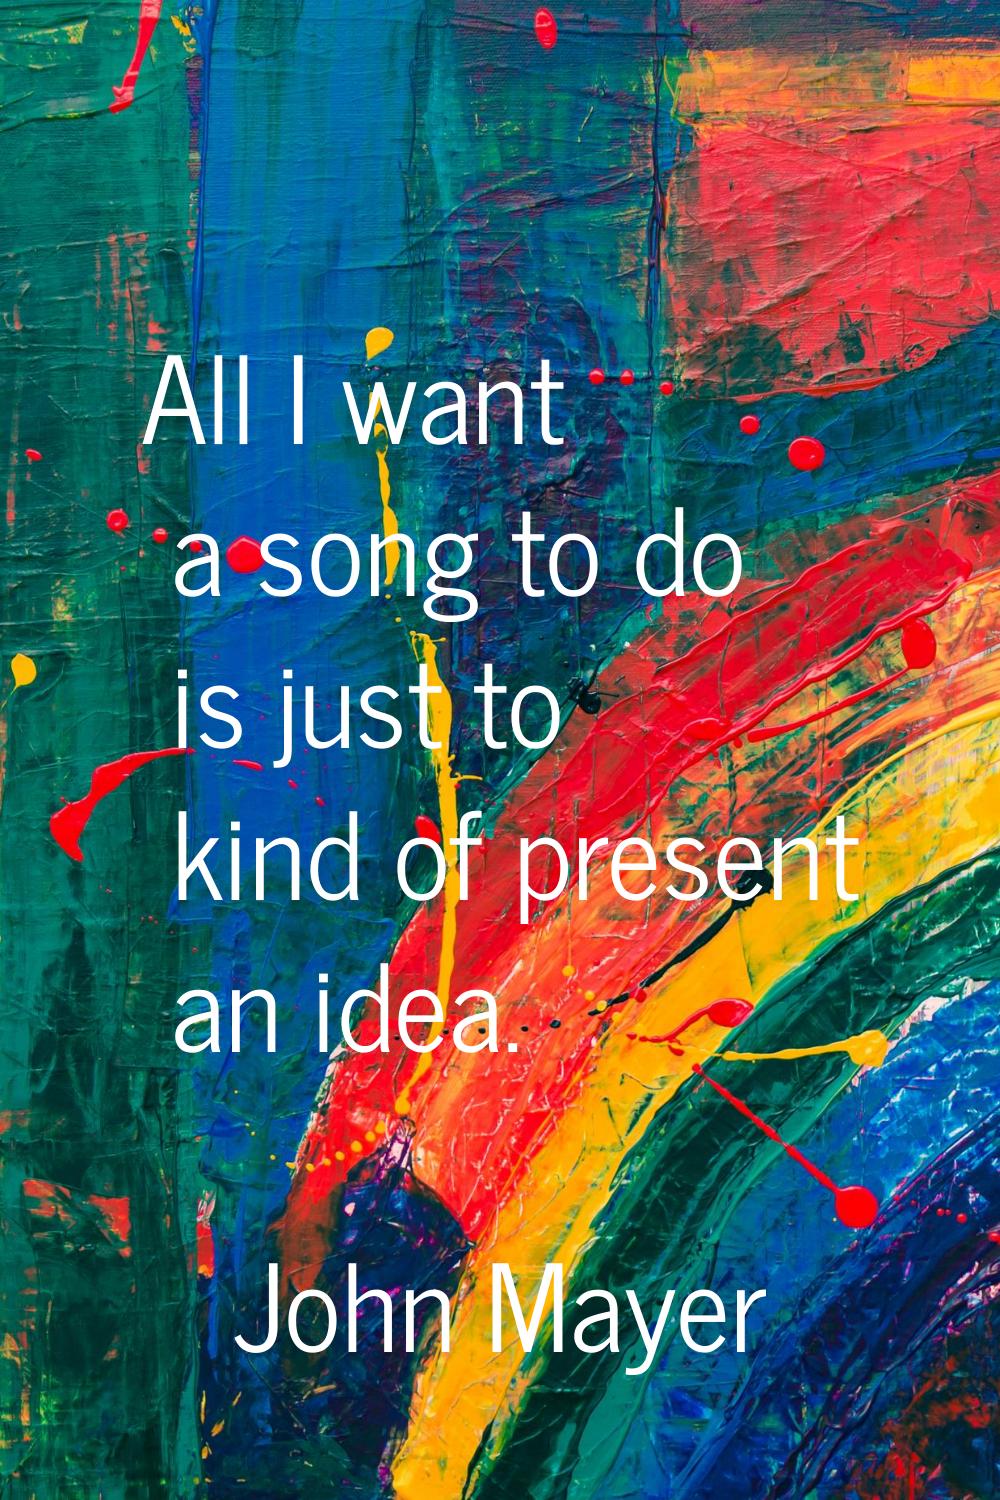 All I want a song to do is just to kind of present an idea.